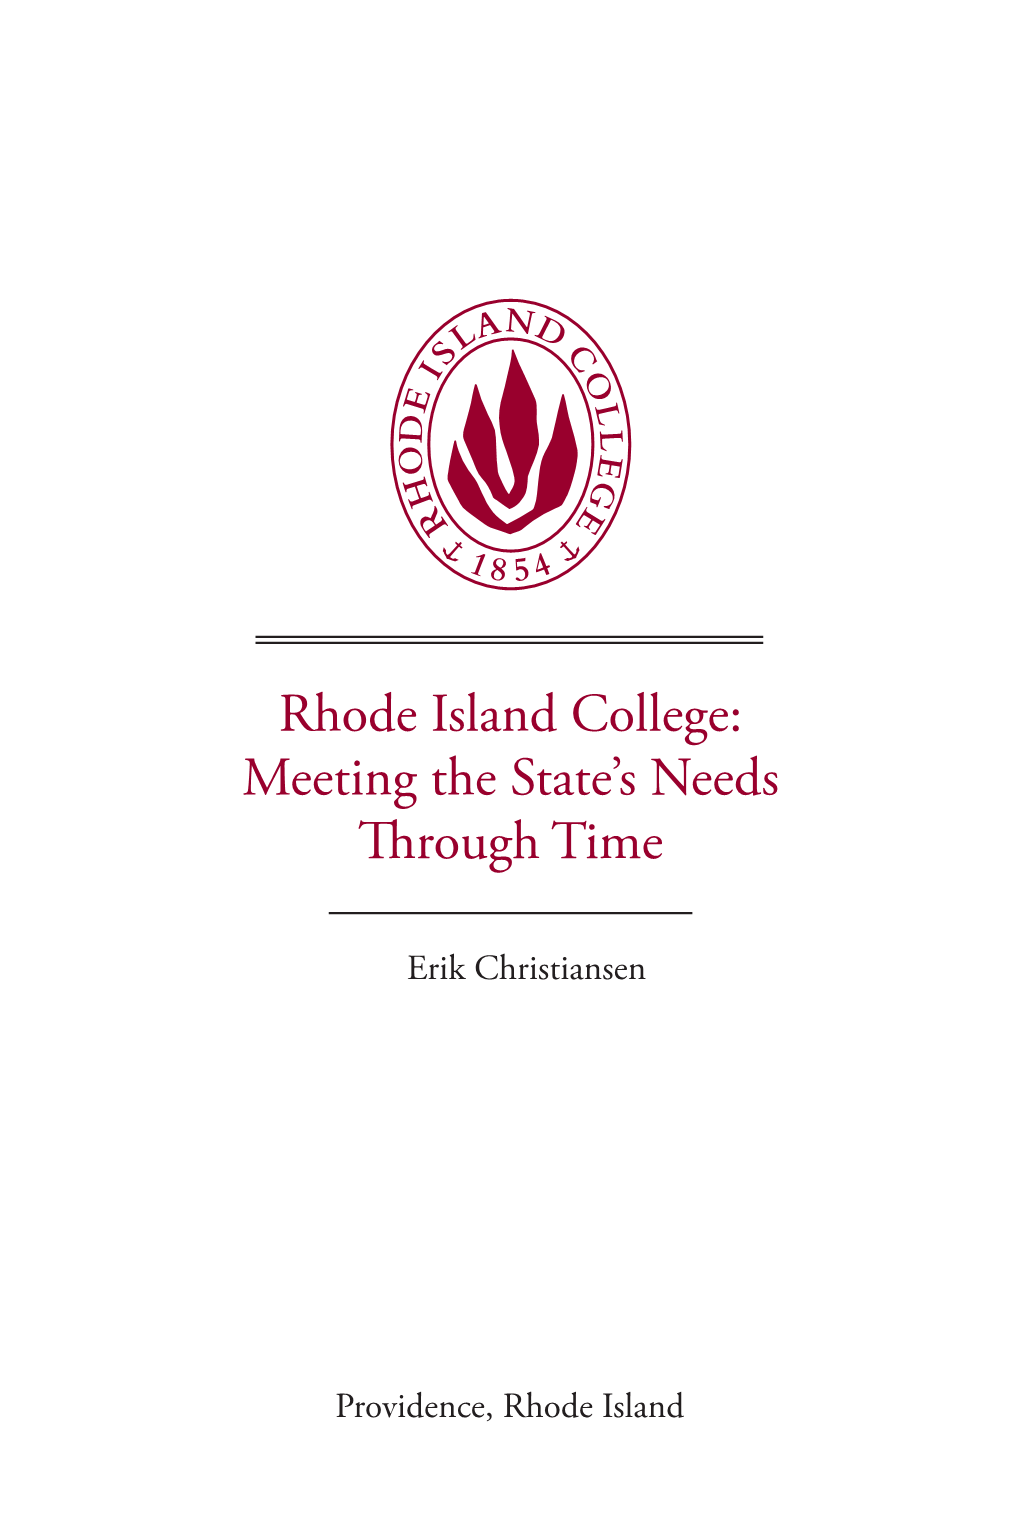 Rhode Island College: Meeting the State's Needs Through Time